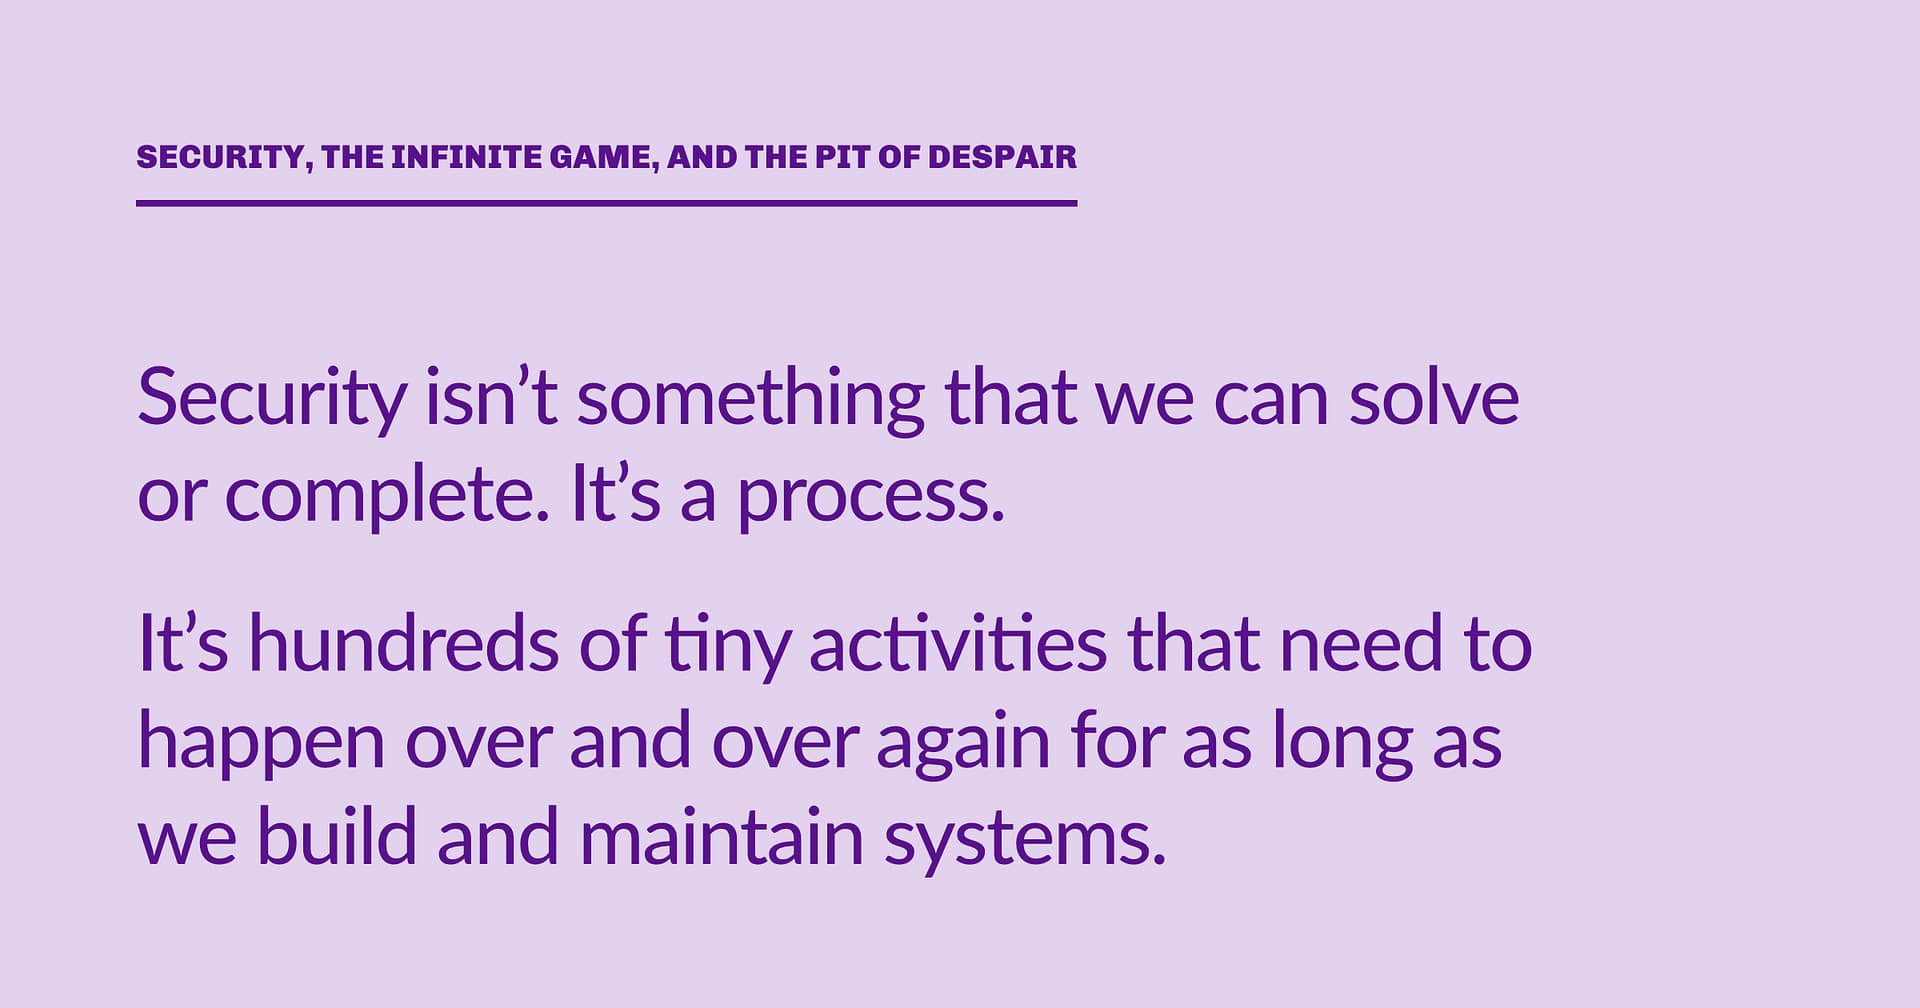 Highlight block: Security isn’t something that we can solve or complete. It’s a process. It’s hundreds of tiny activities that need to happen over and over again for as long as we build and maintain systems.